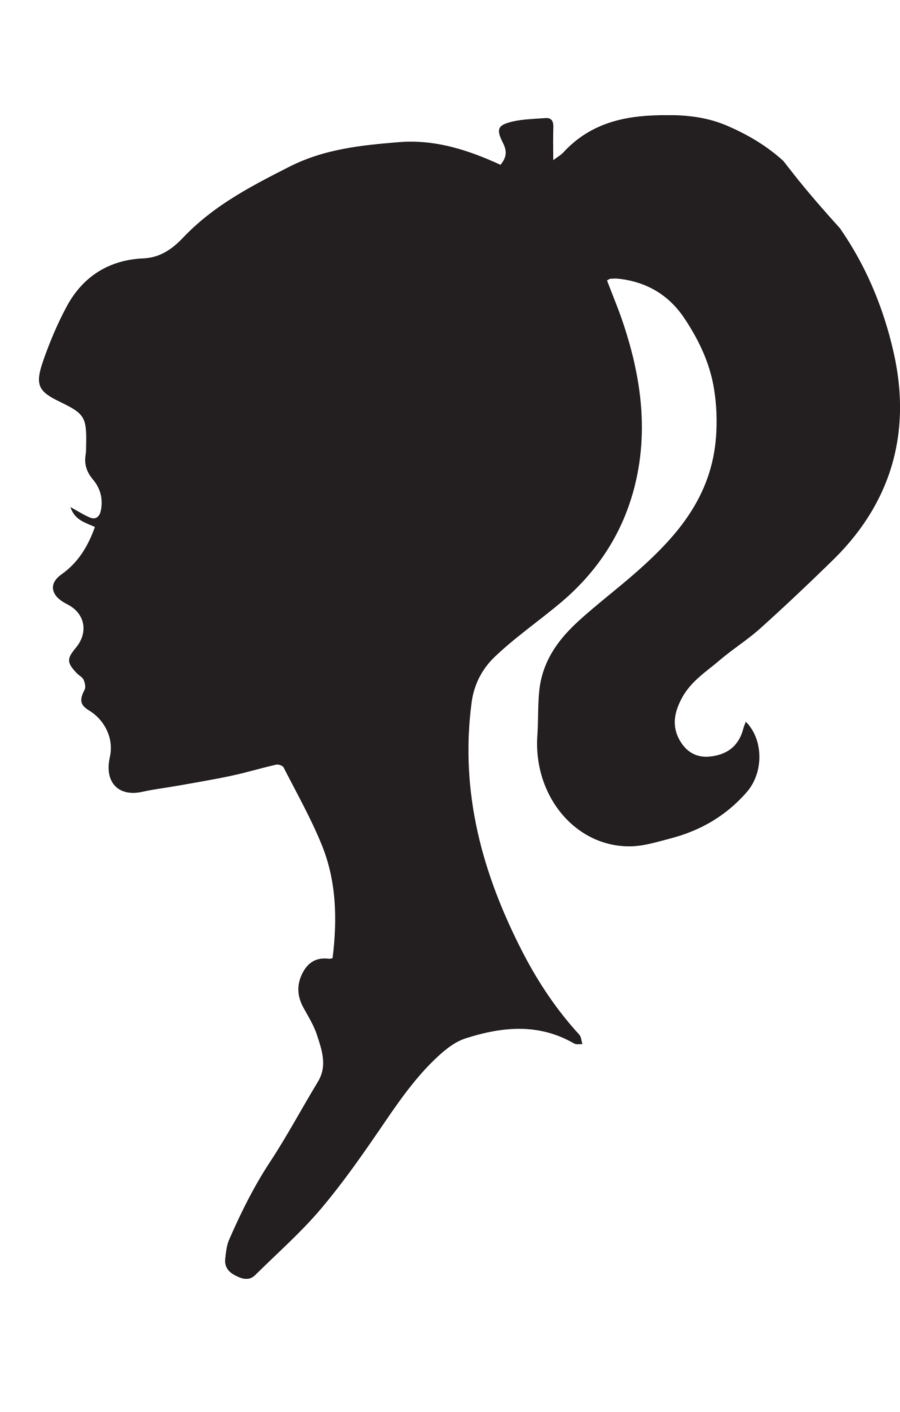 Female Silhouette Profile by snicklefritz-stock on deviantART